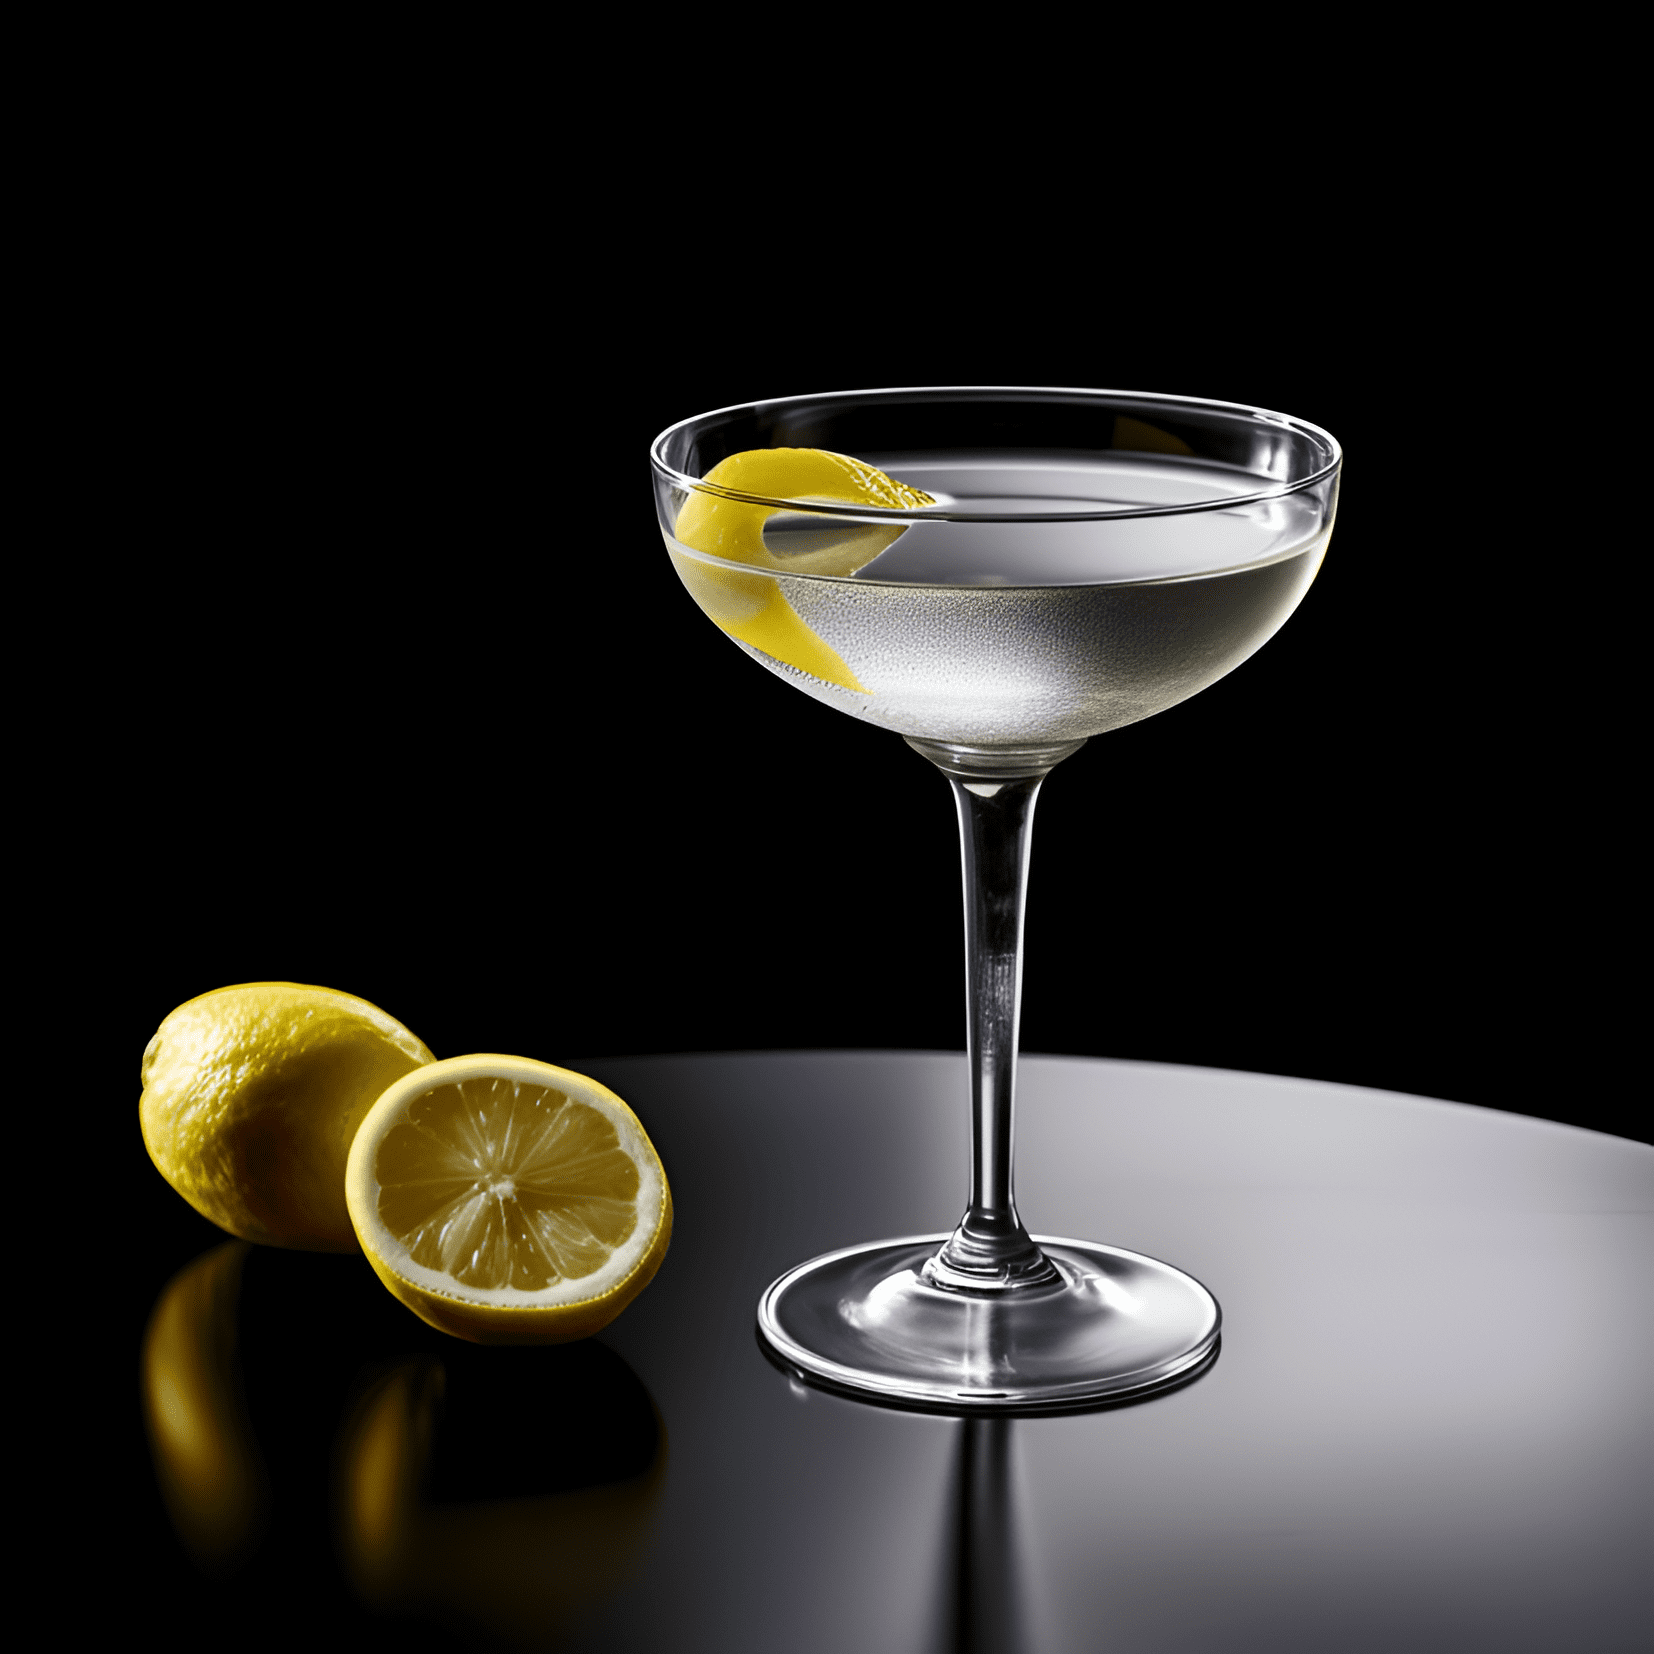 Vesper Cocktail Recipe - The Vesper cocktail has a complex taste, with a balance of bitterness, sweetness, and herbal notes. It is strong, smooth, and slightly dry, with a crisp, refreshing finish.